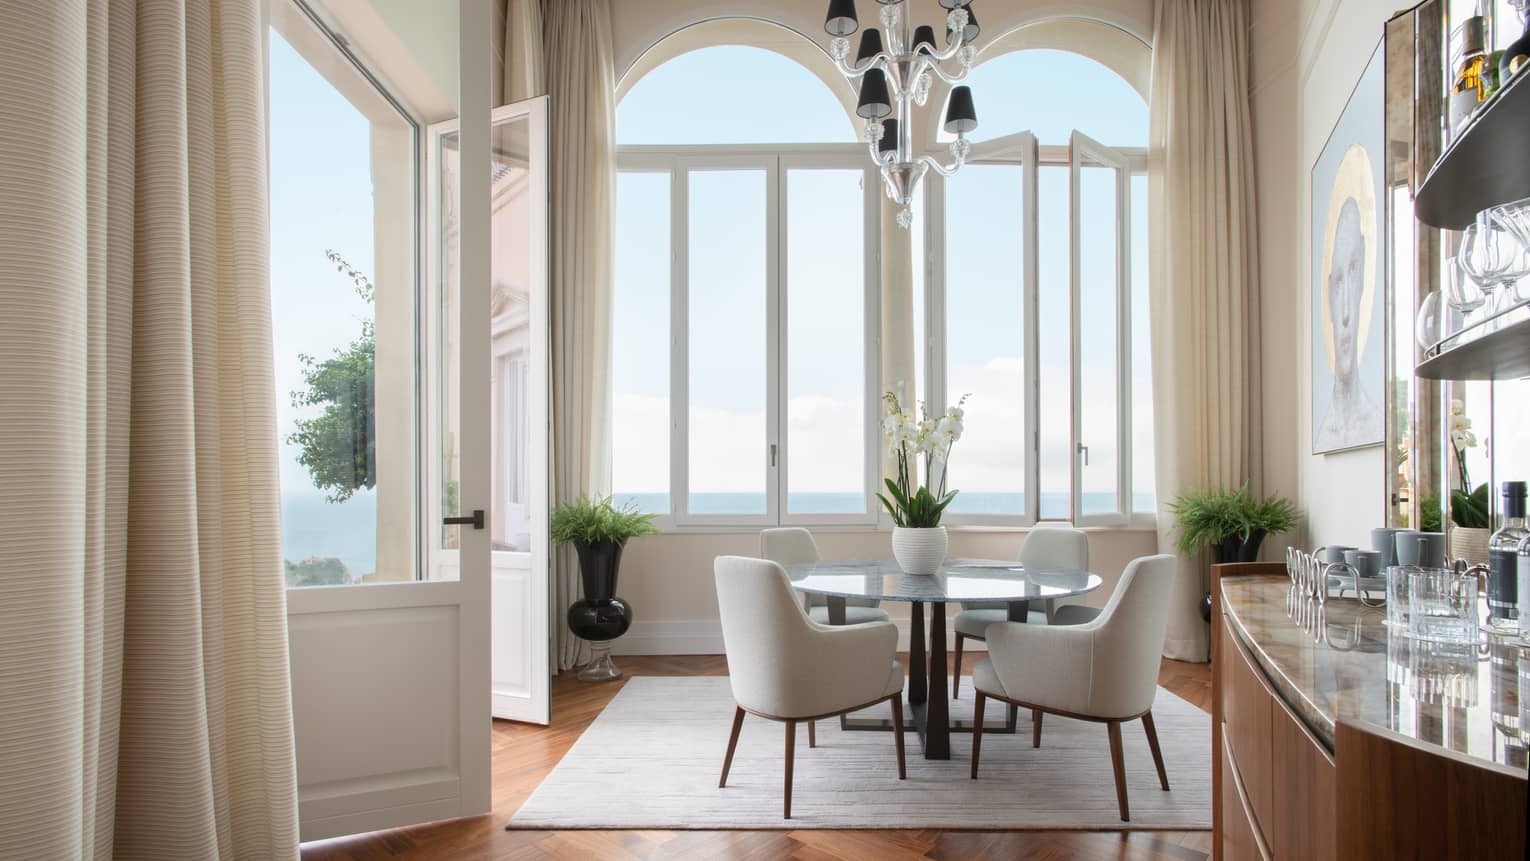 Elegant dining room, table with four chairs, tall windows with sea view